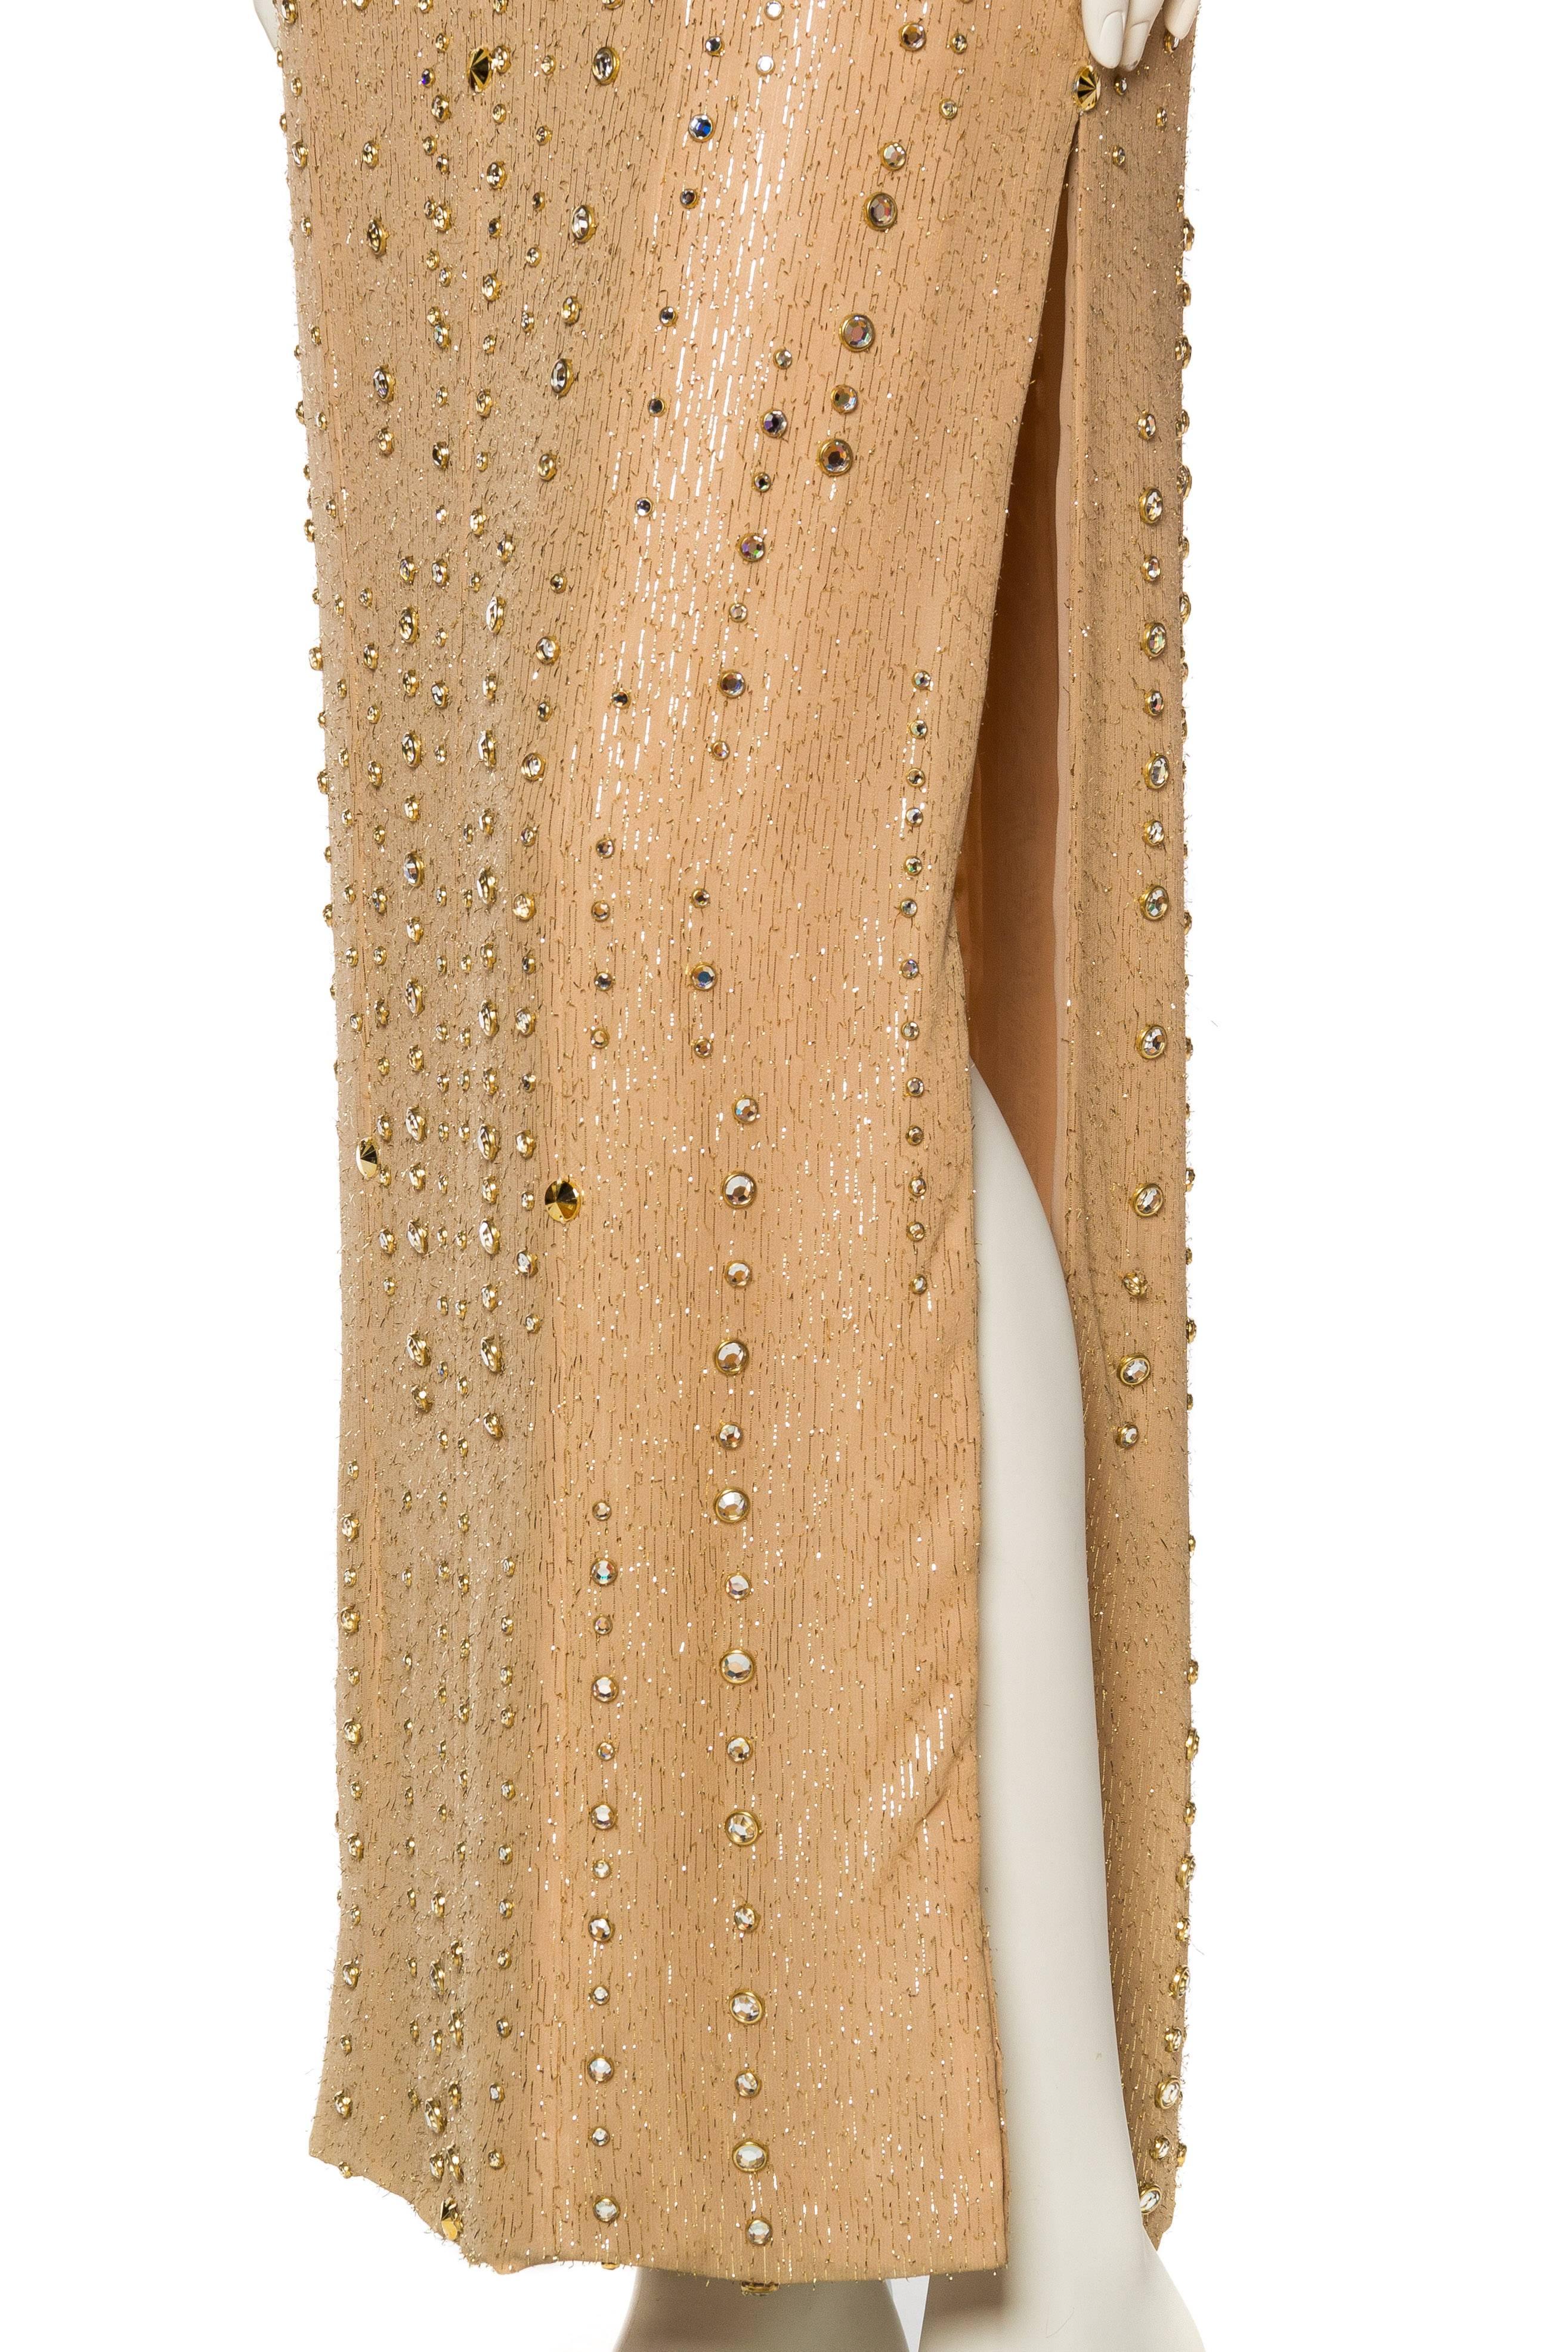 1970s Nude & Gold Halter Gown with Studs and Crystals 5